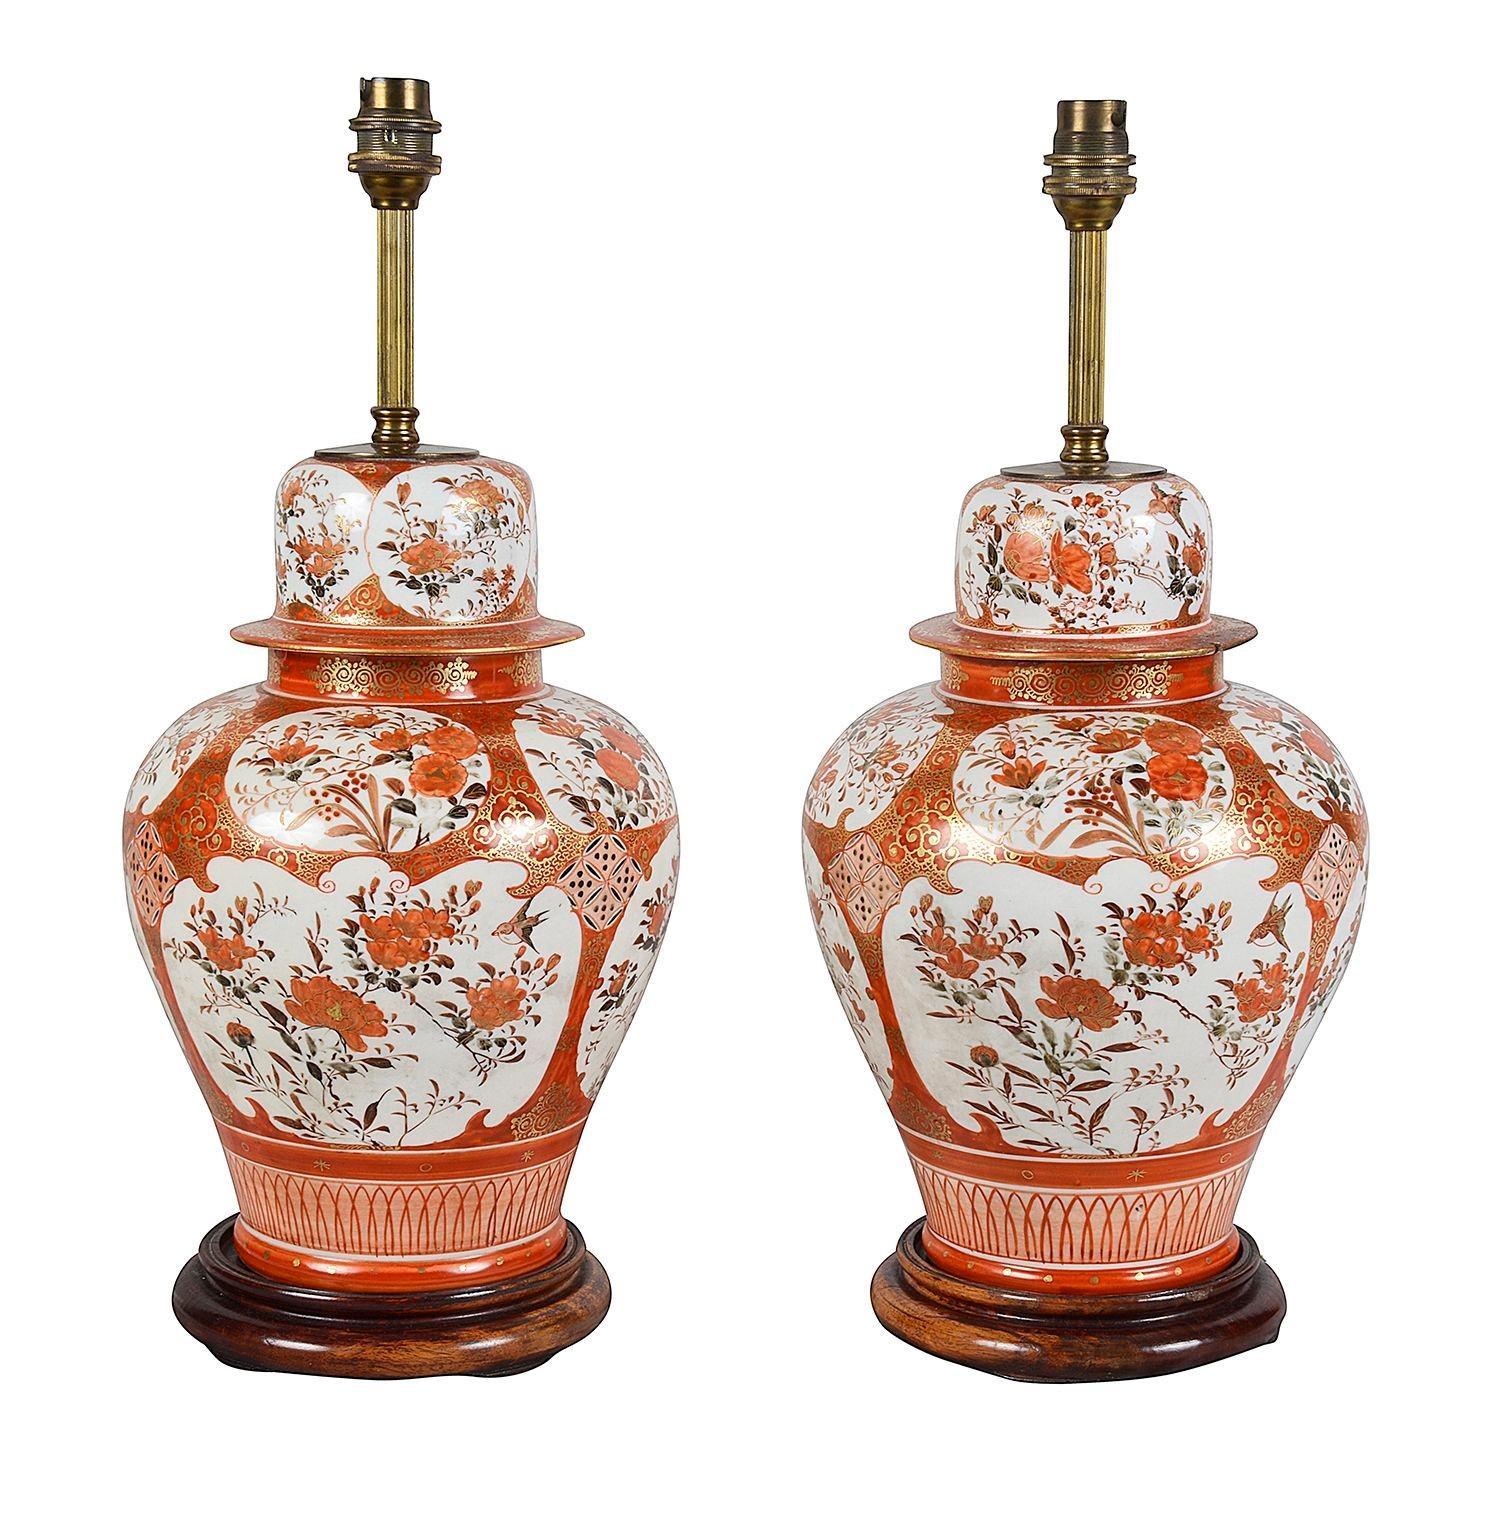 A good quality pair of late 19th Century Japanese Kutani porcelain vases / lamps. Each with the classical bold orange ground with scrolling gilded decoration. Inset hand painted panels depicting exotic floral scenes.

Batch 77